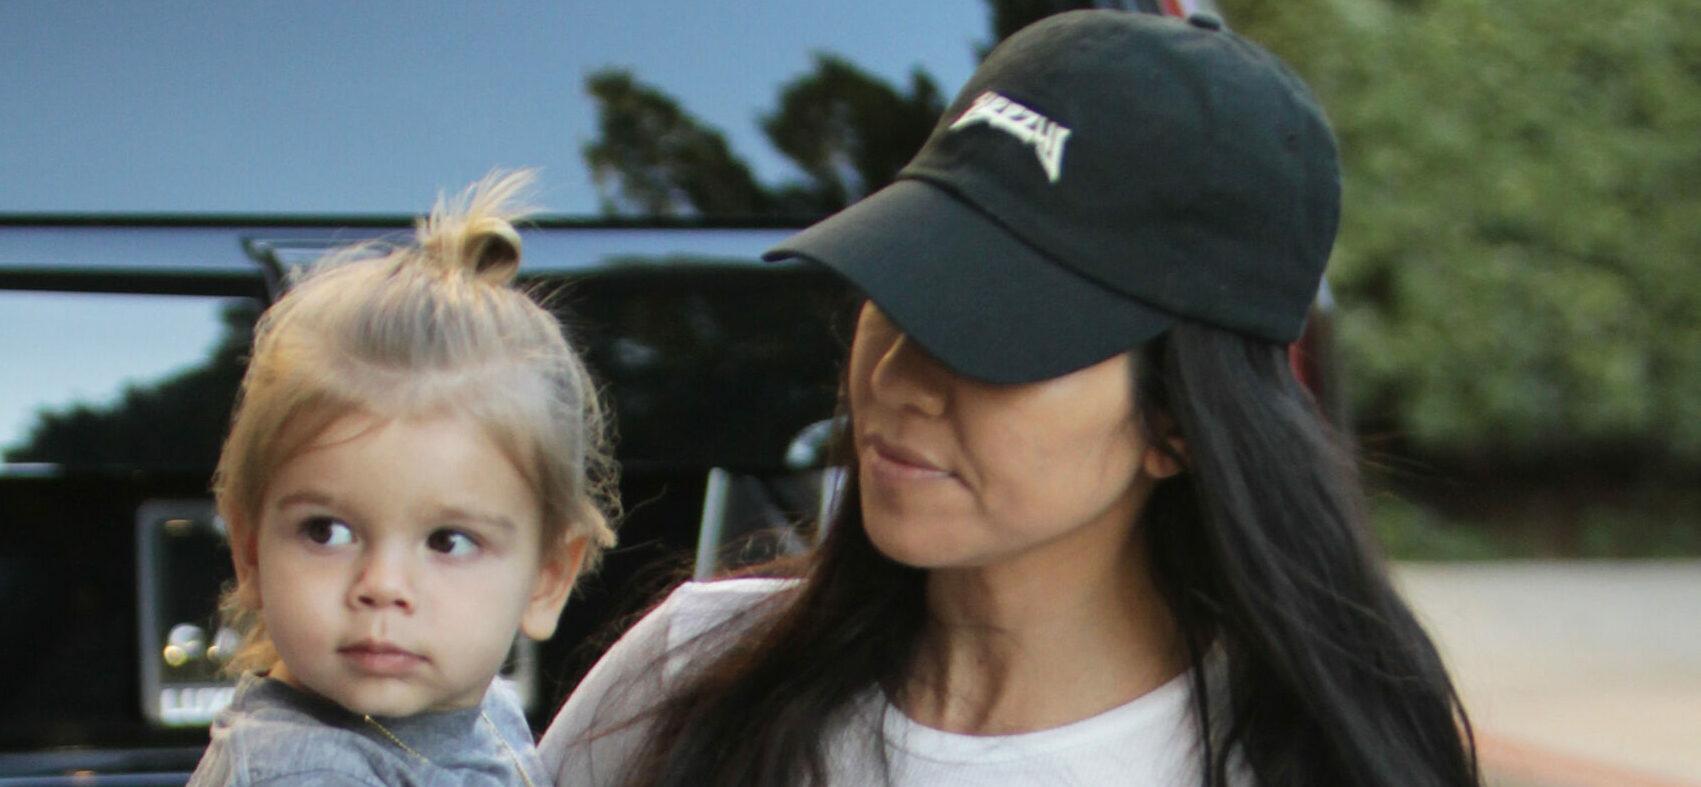 Kourtney Kardashian Laments Being Away From Kids While On Tour With Travis Barker